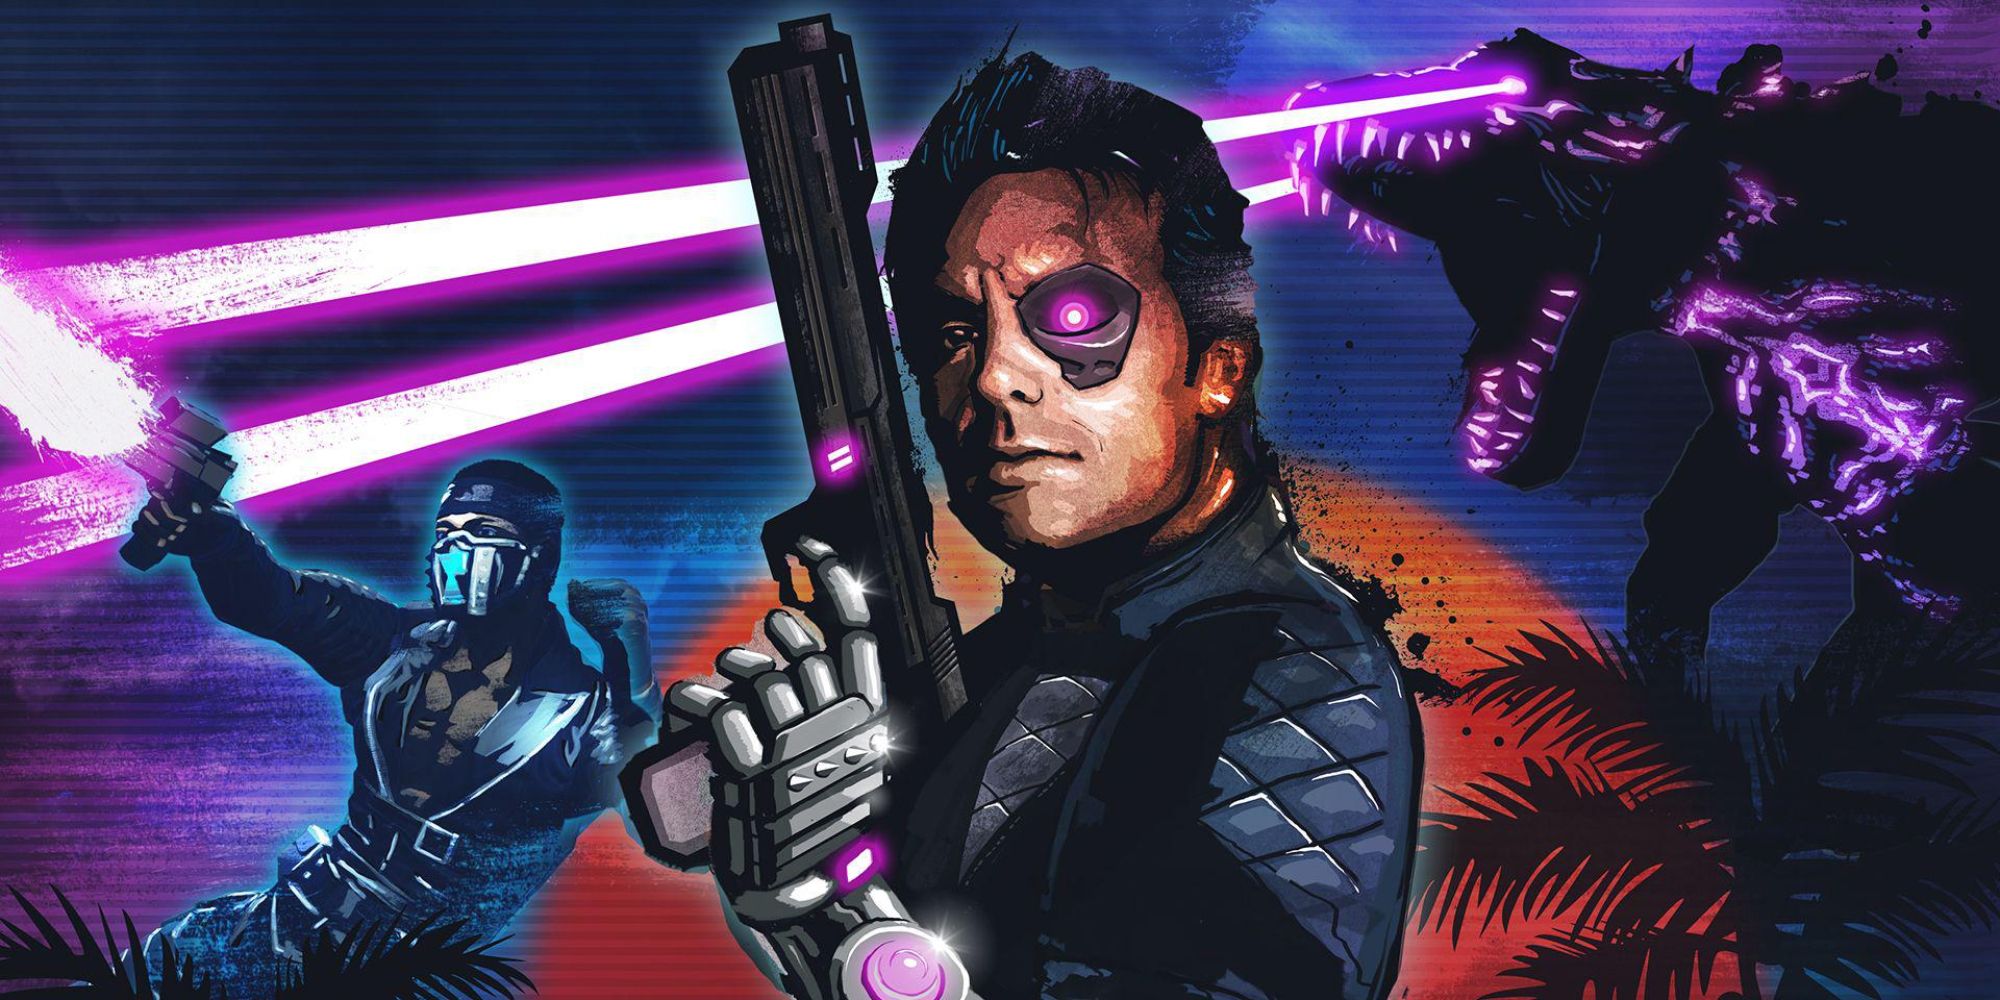 Main character of Far Cry 3: Blood Dragon played by 80s action star Michael Biehn